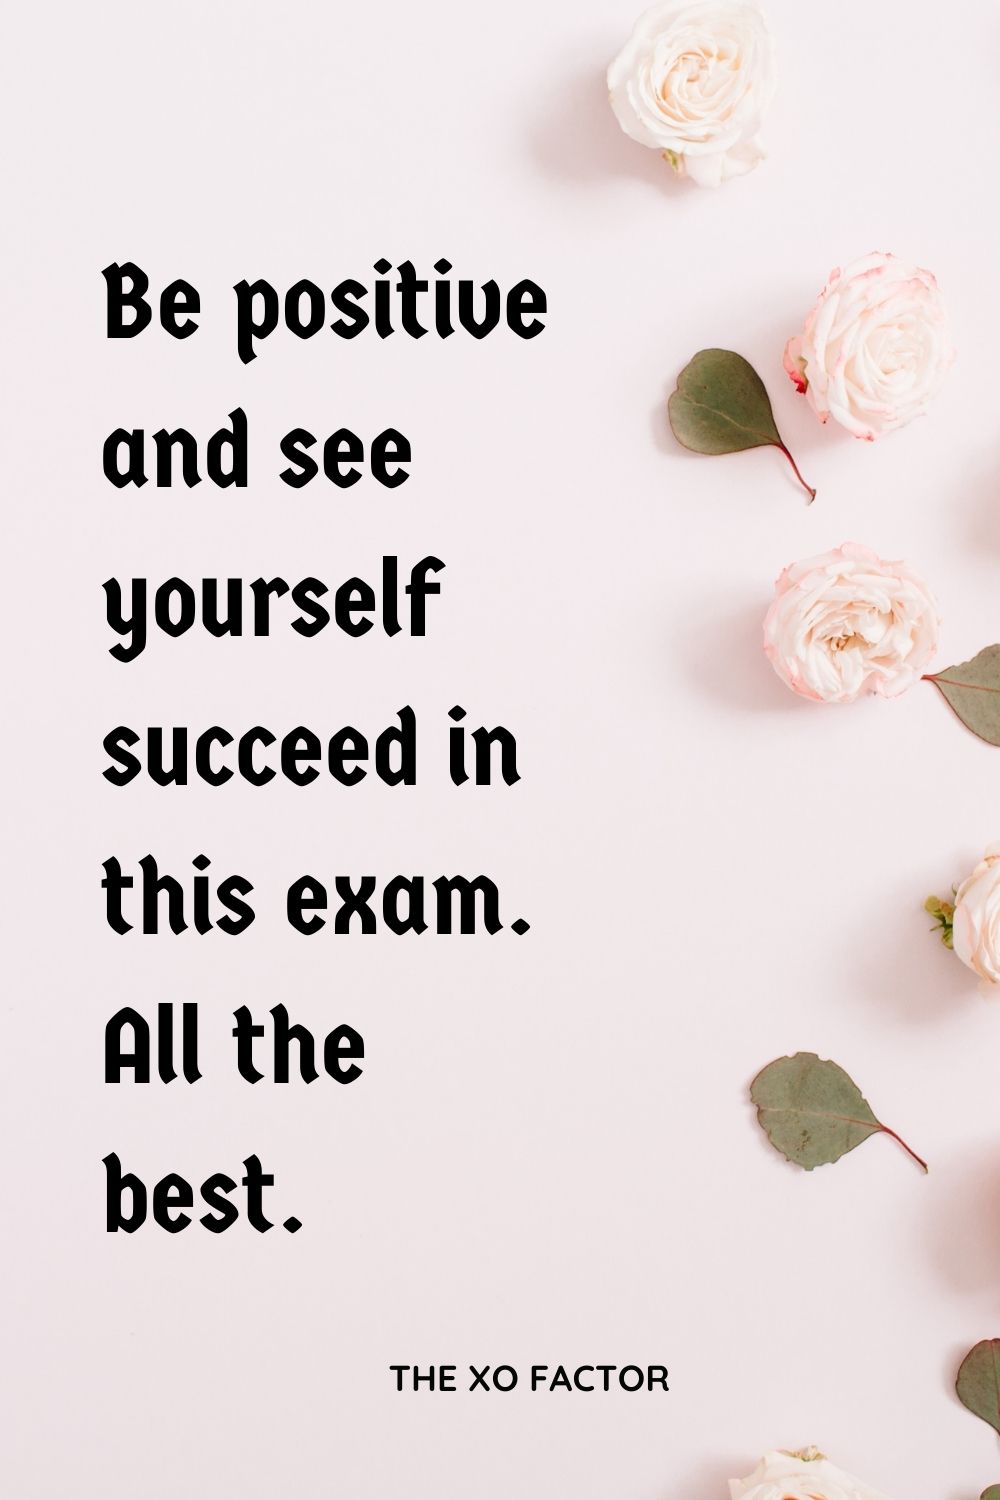 Be positive and see yourself succeed in this exam. All the best.